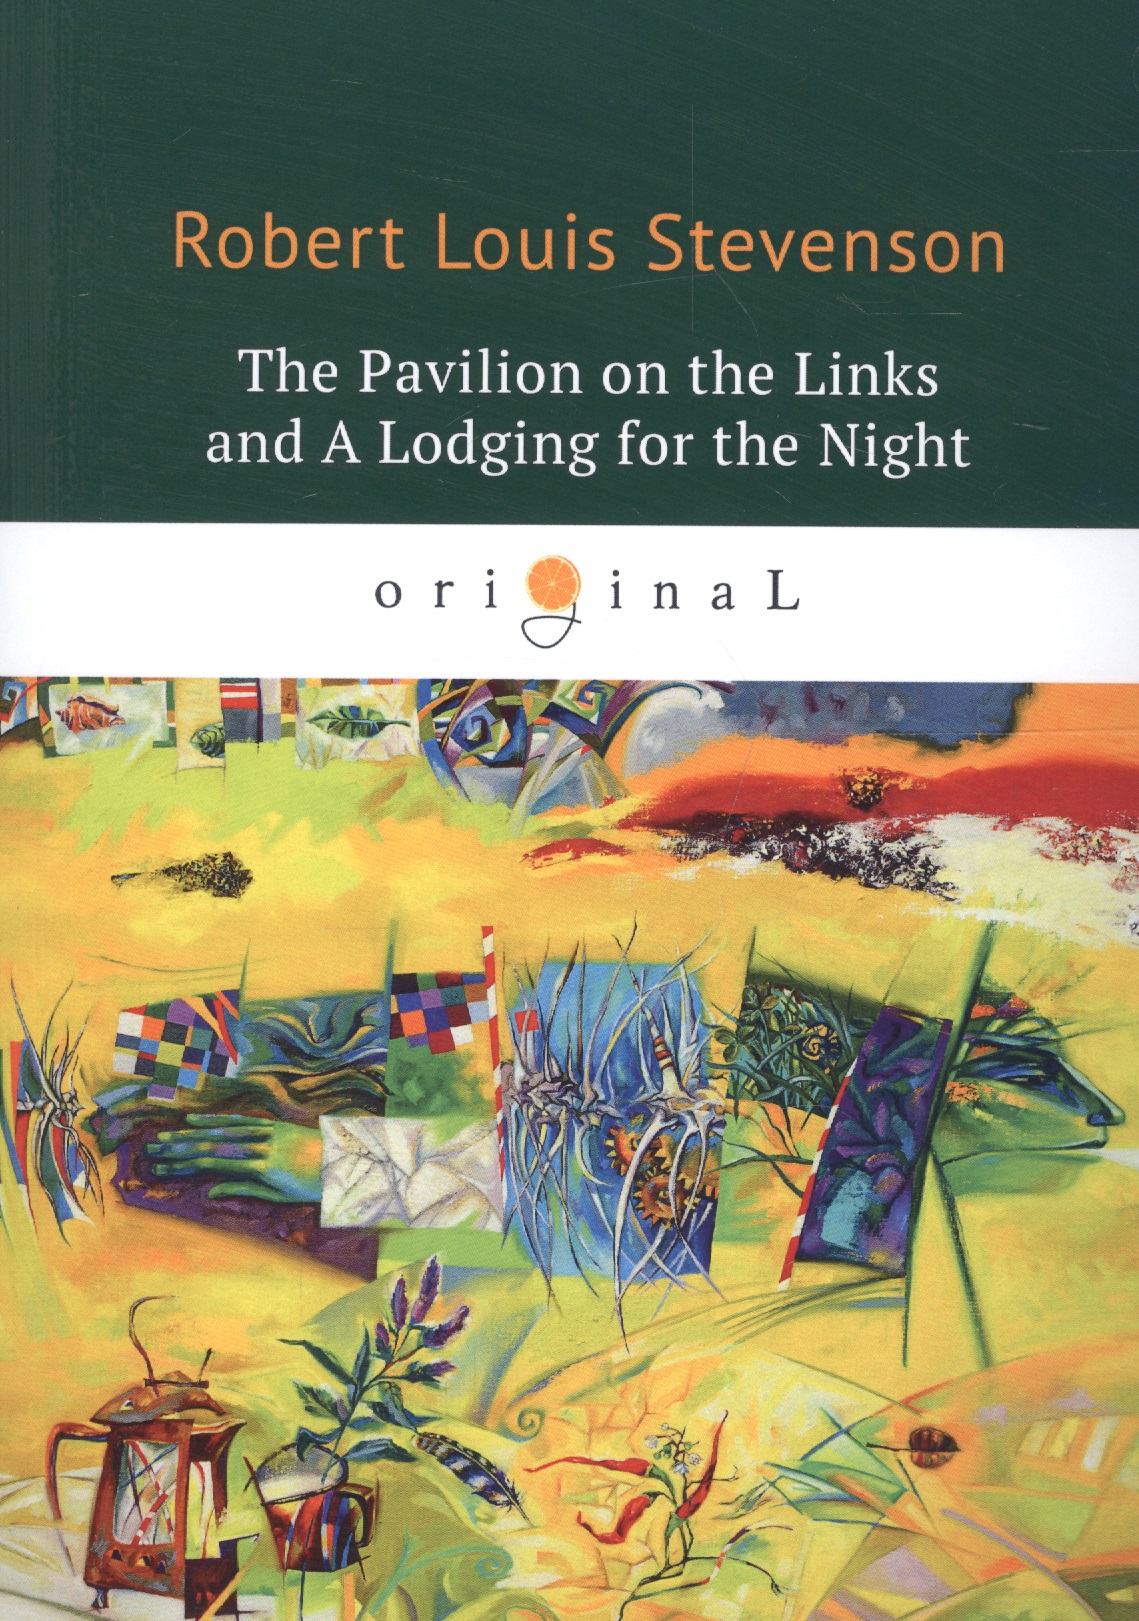 The Pavilion on the Links and A Lodging for the Night = Дом на Дюнах и Ночлег: на английском языке foreign language book the pavilion on the links and a lodging for the night дом на дюнах и ночлег на английском языке stevenson r